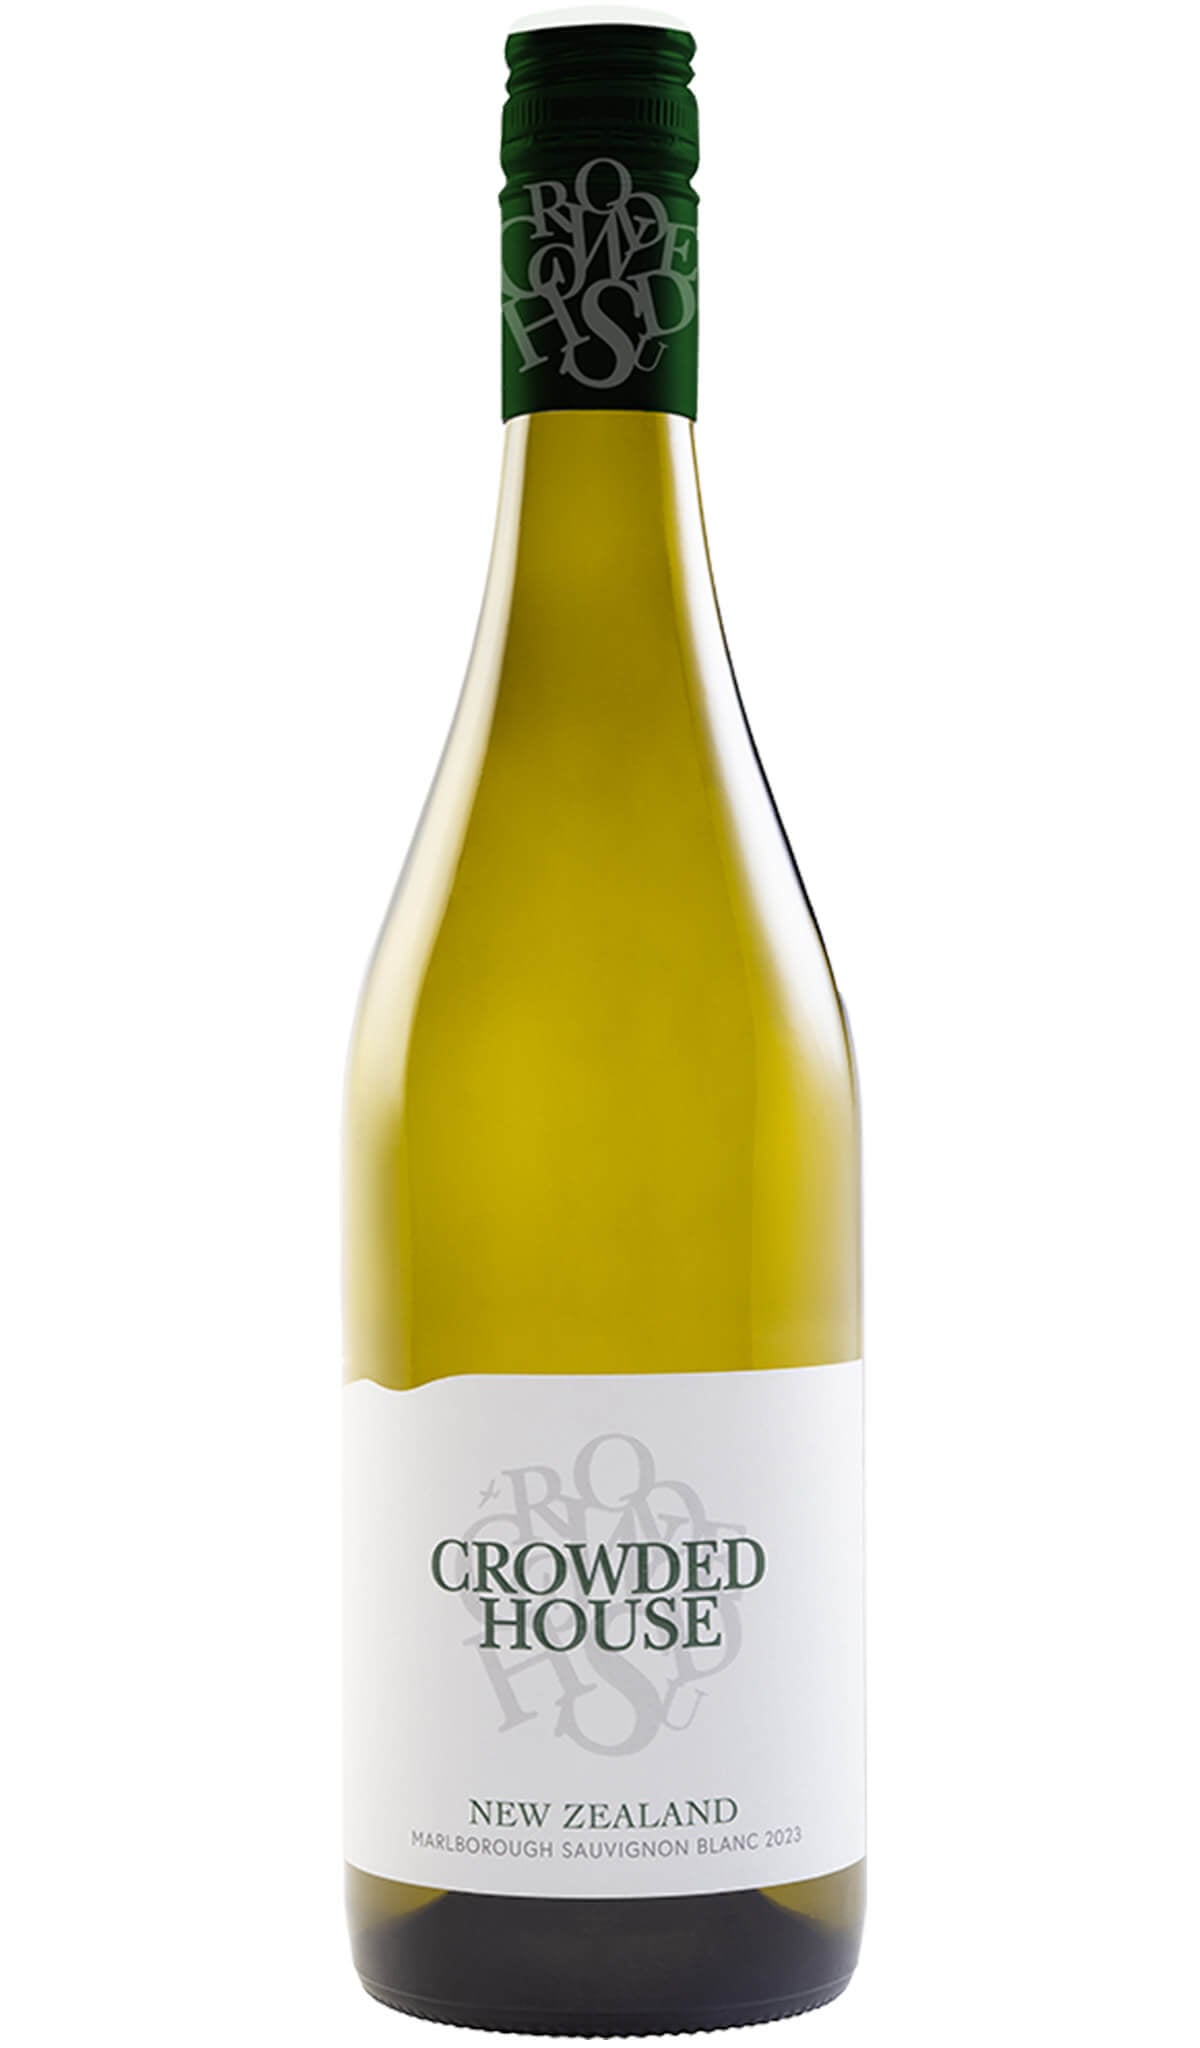 Find out more or buy Crowded House Sauvignon Blanc 2023 (Marlborough) online at Wine Sellers Direct - Australia’s independent liquor specialists.